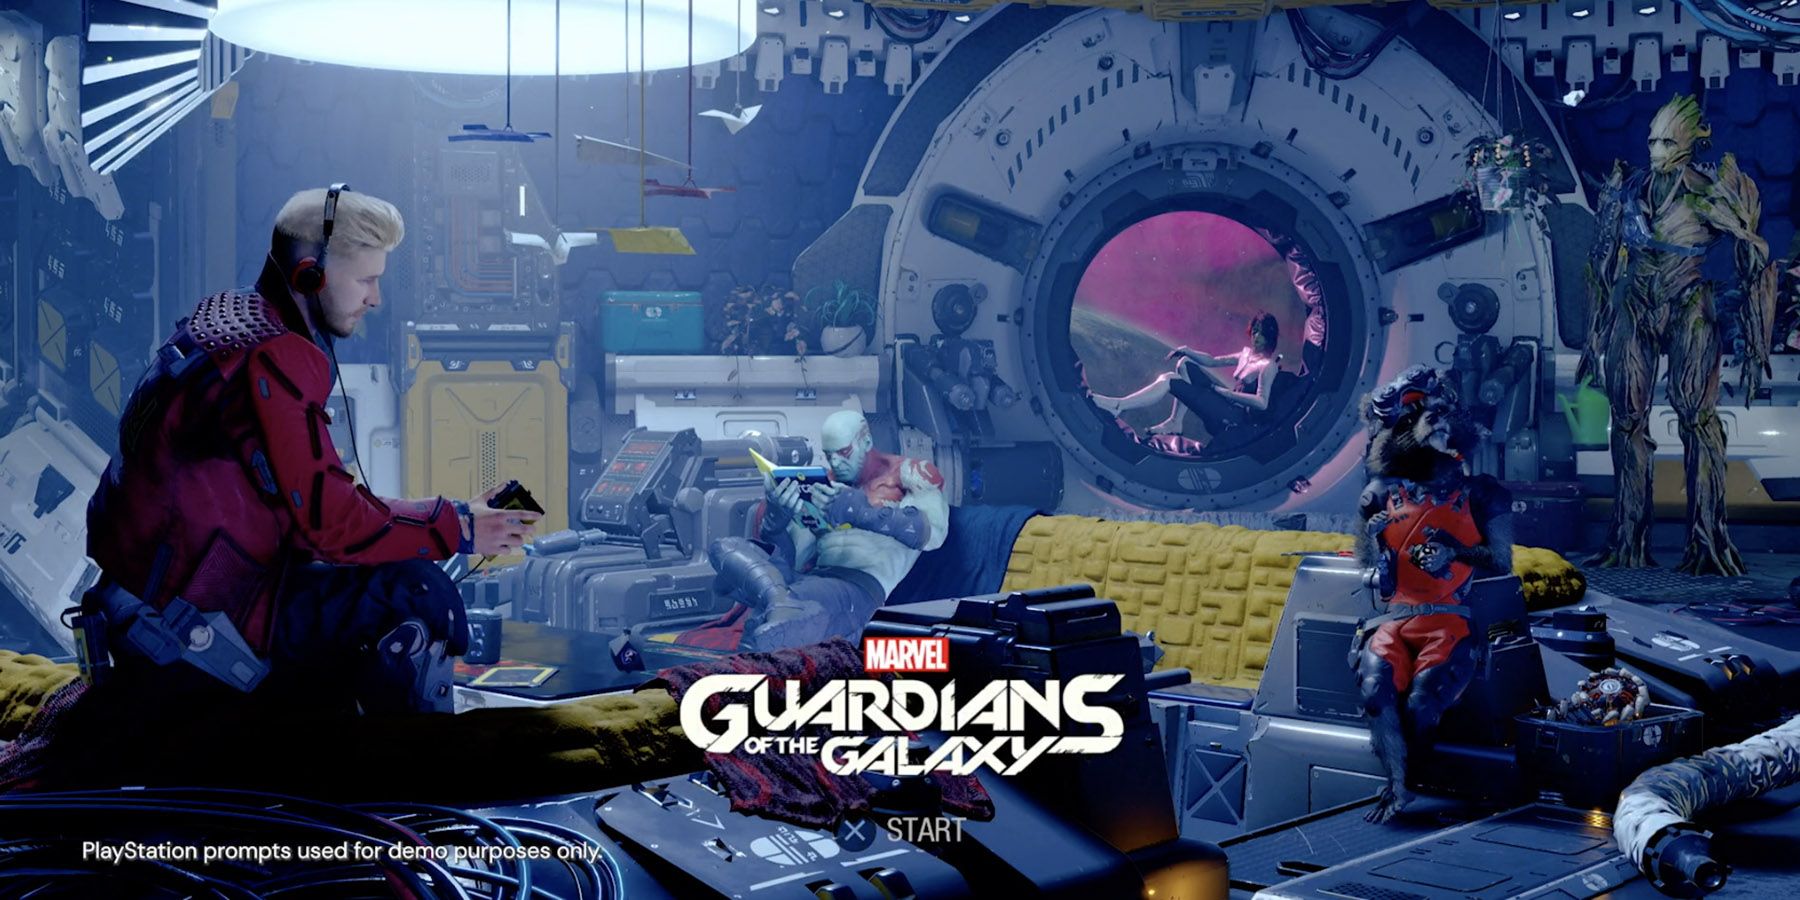 Marvel’s Guardians of the Galaxy 트랙 목록(지금까지 확인됨)